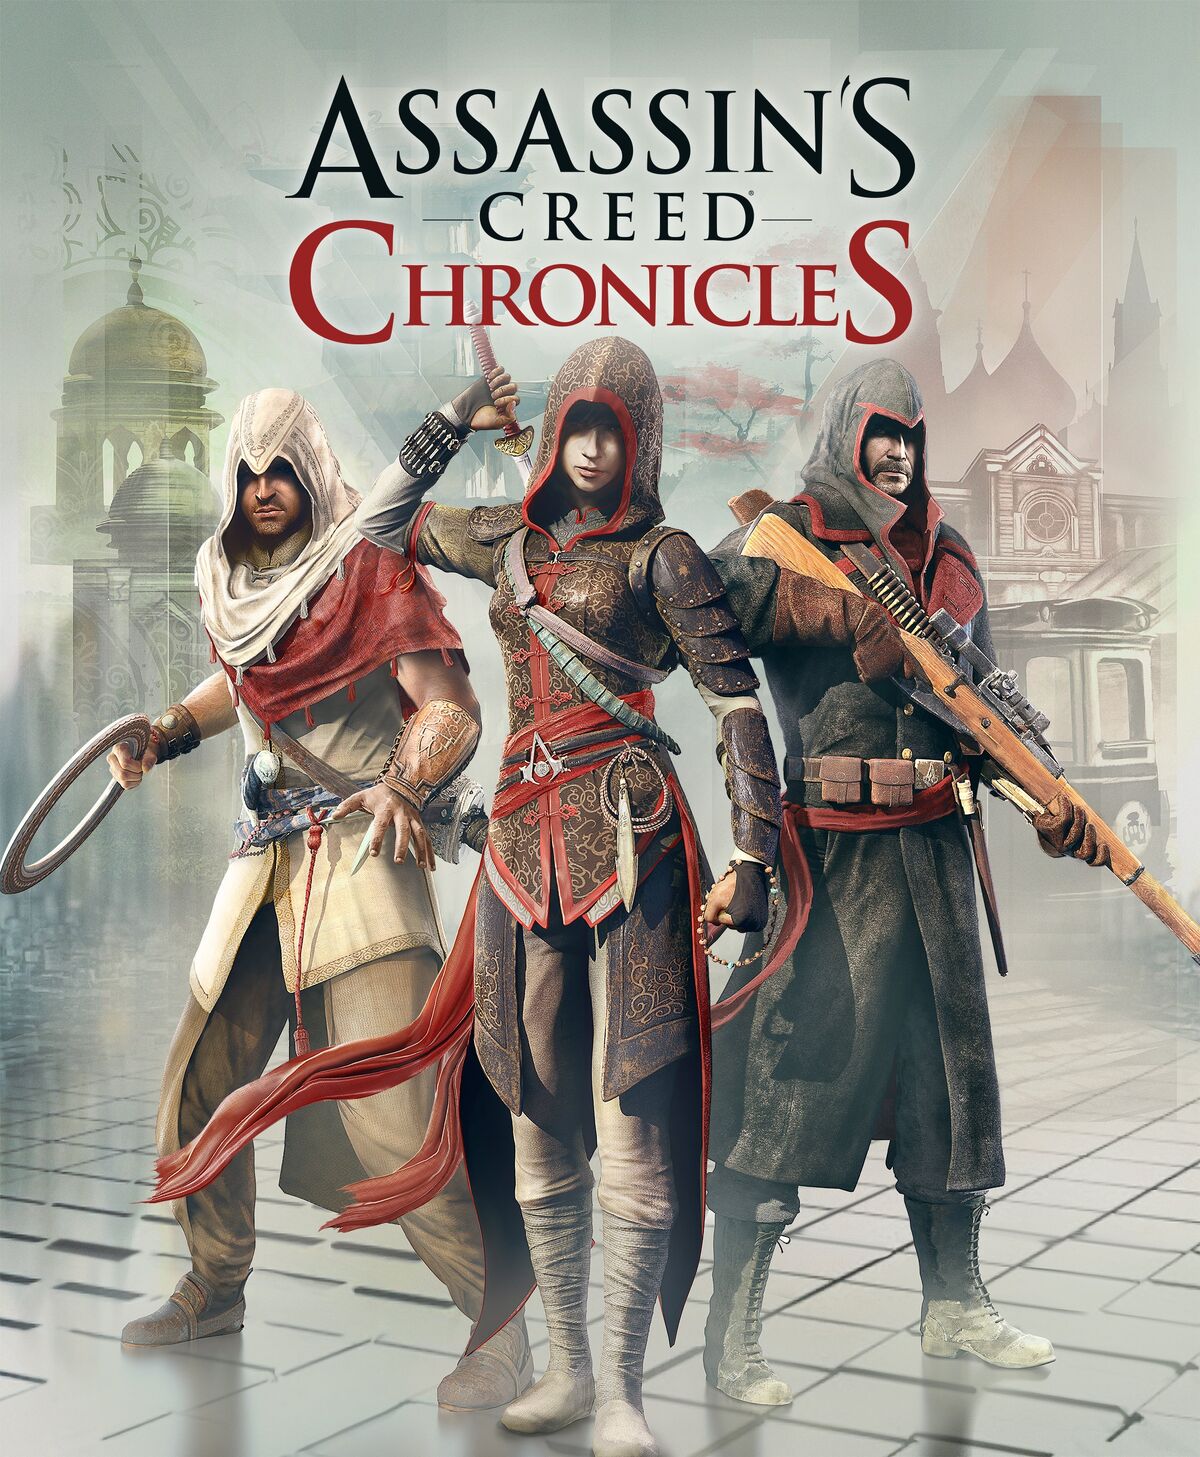 Assassin's Creed II outfits, Assassin's Creed Wiki, Fandom